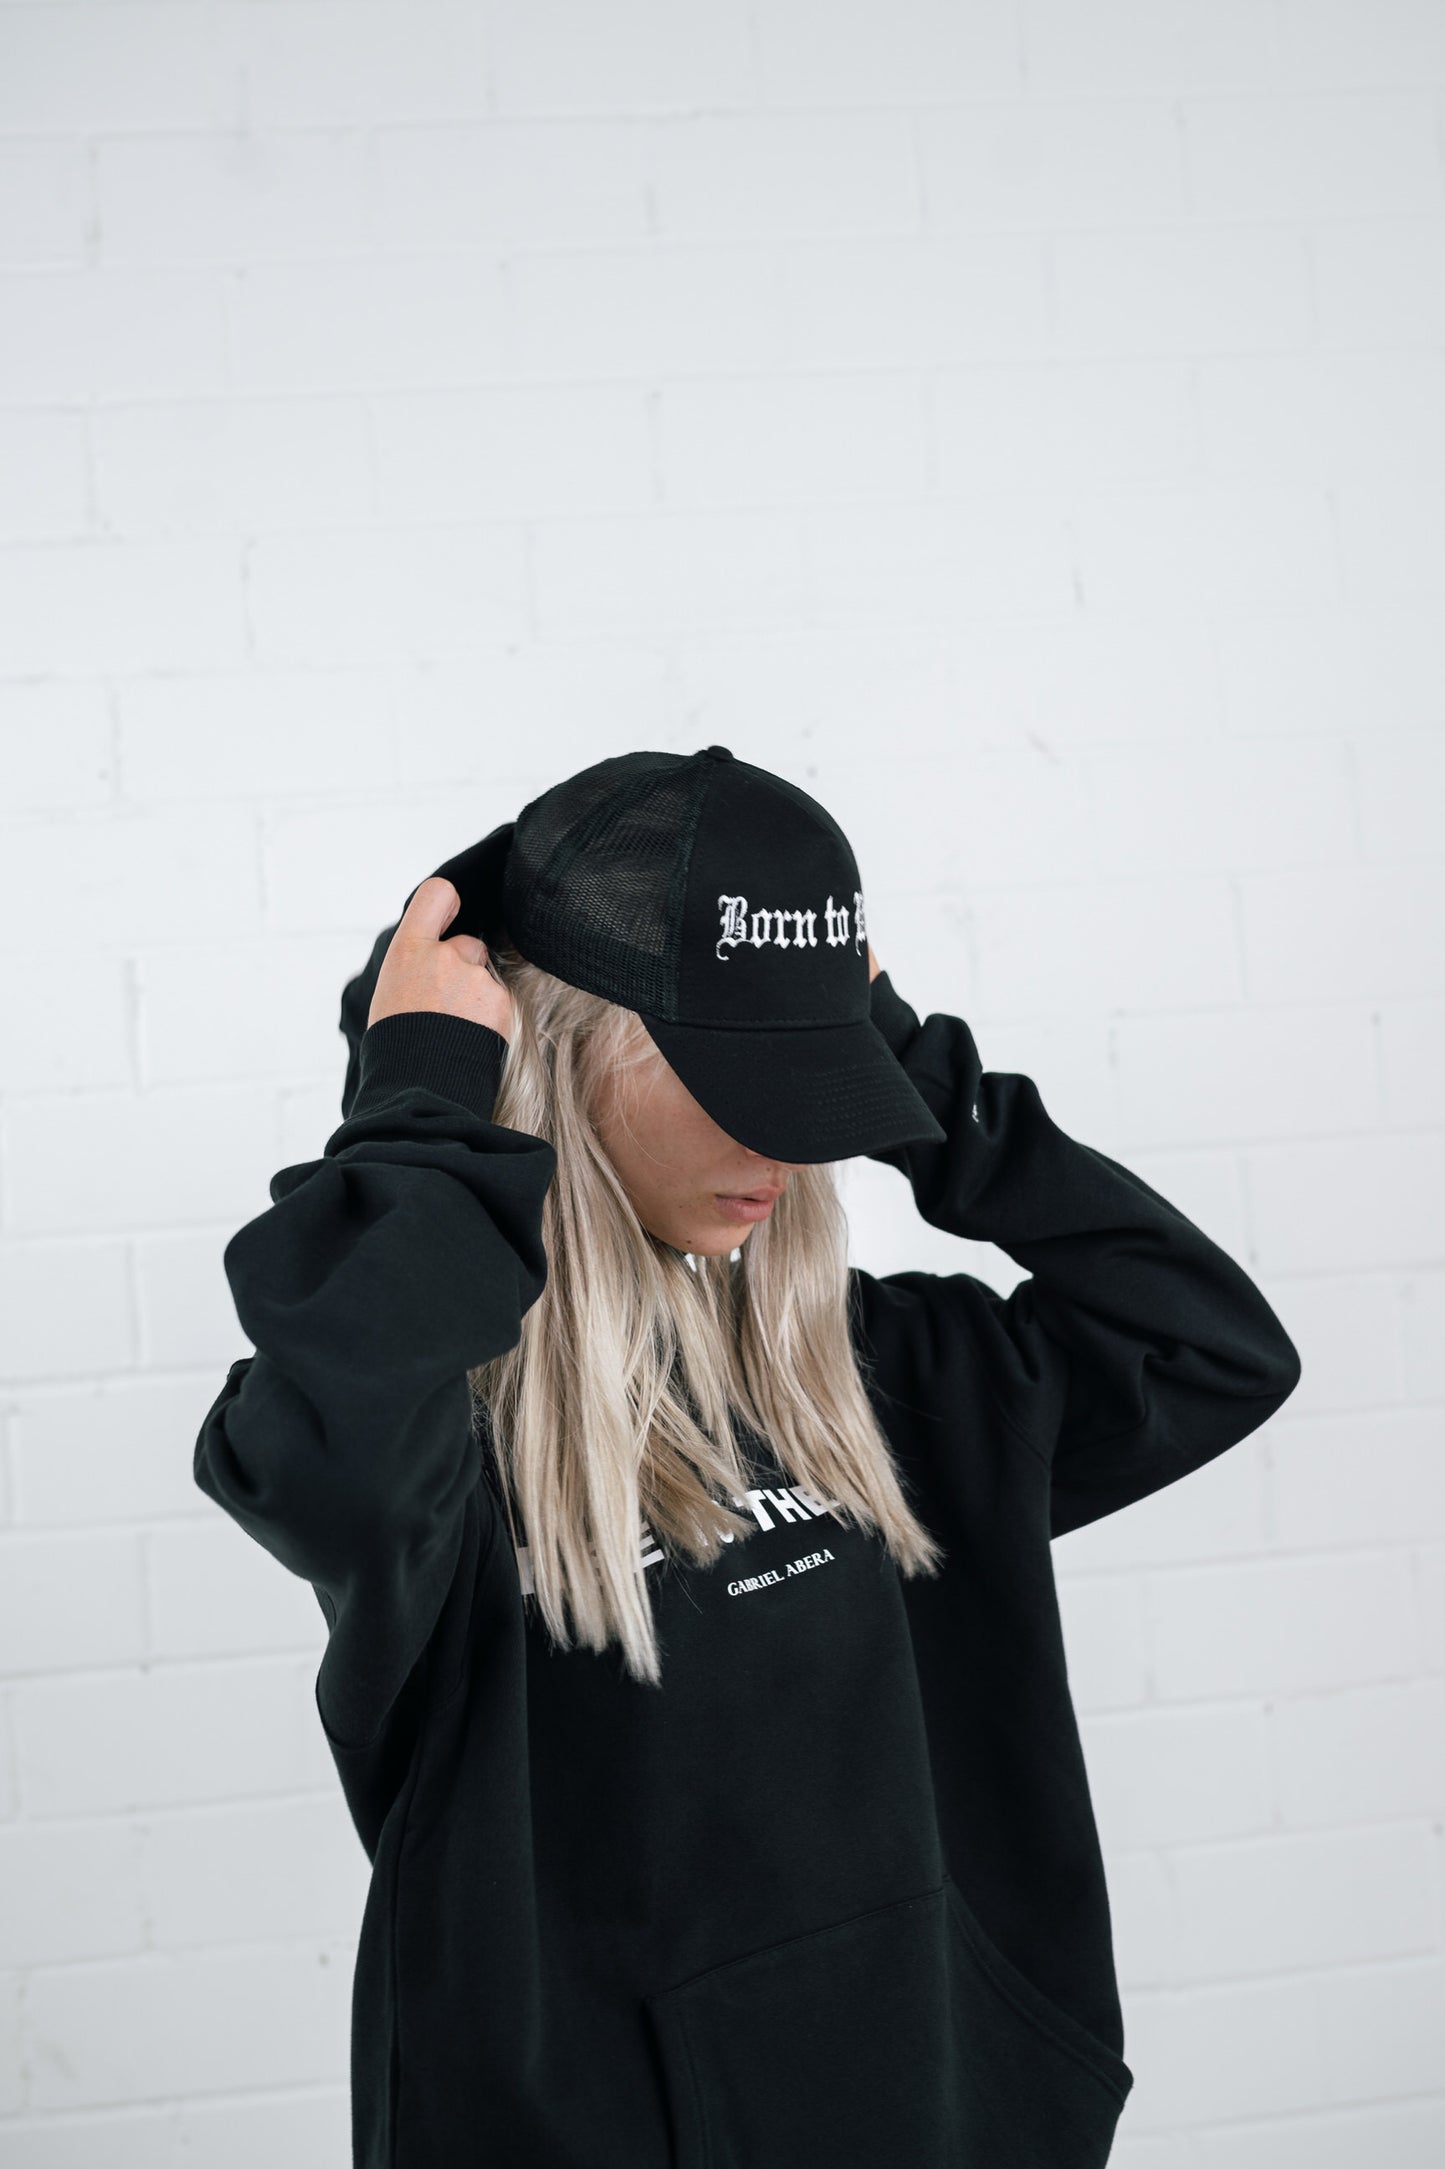 Female model wearing a Black trucker cap with born to win embroidery